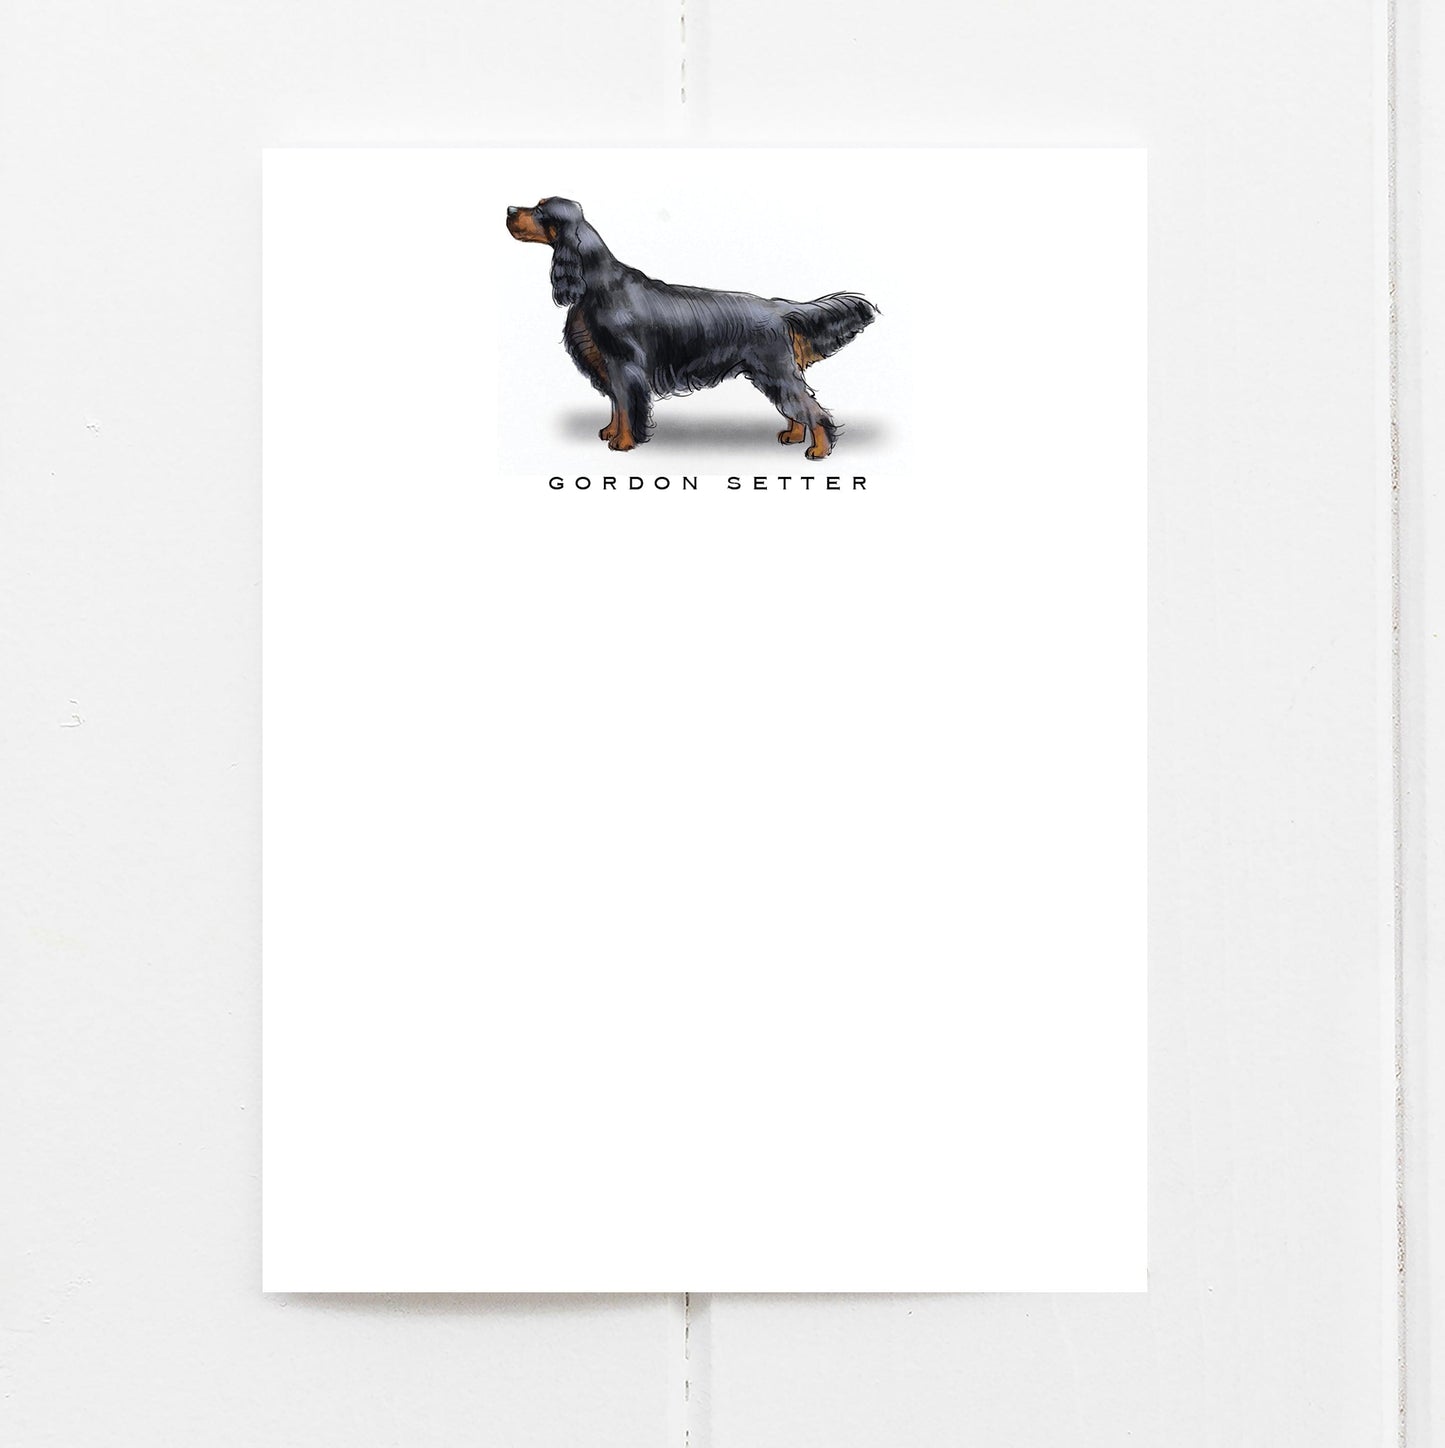 drawing of a Black and Tan gordon setter with the breed name printed below